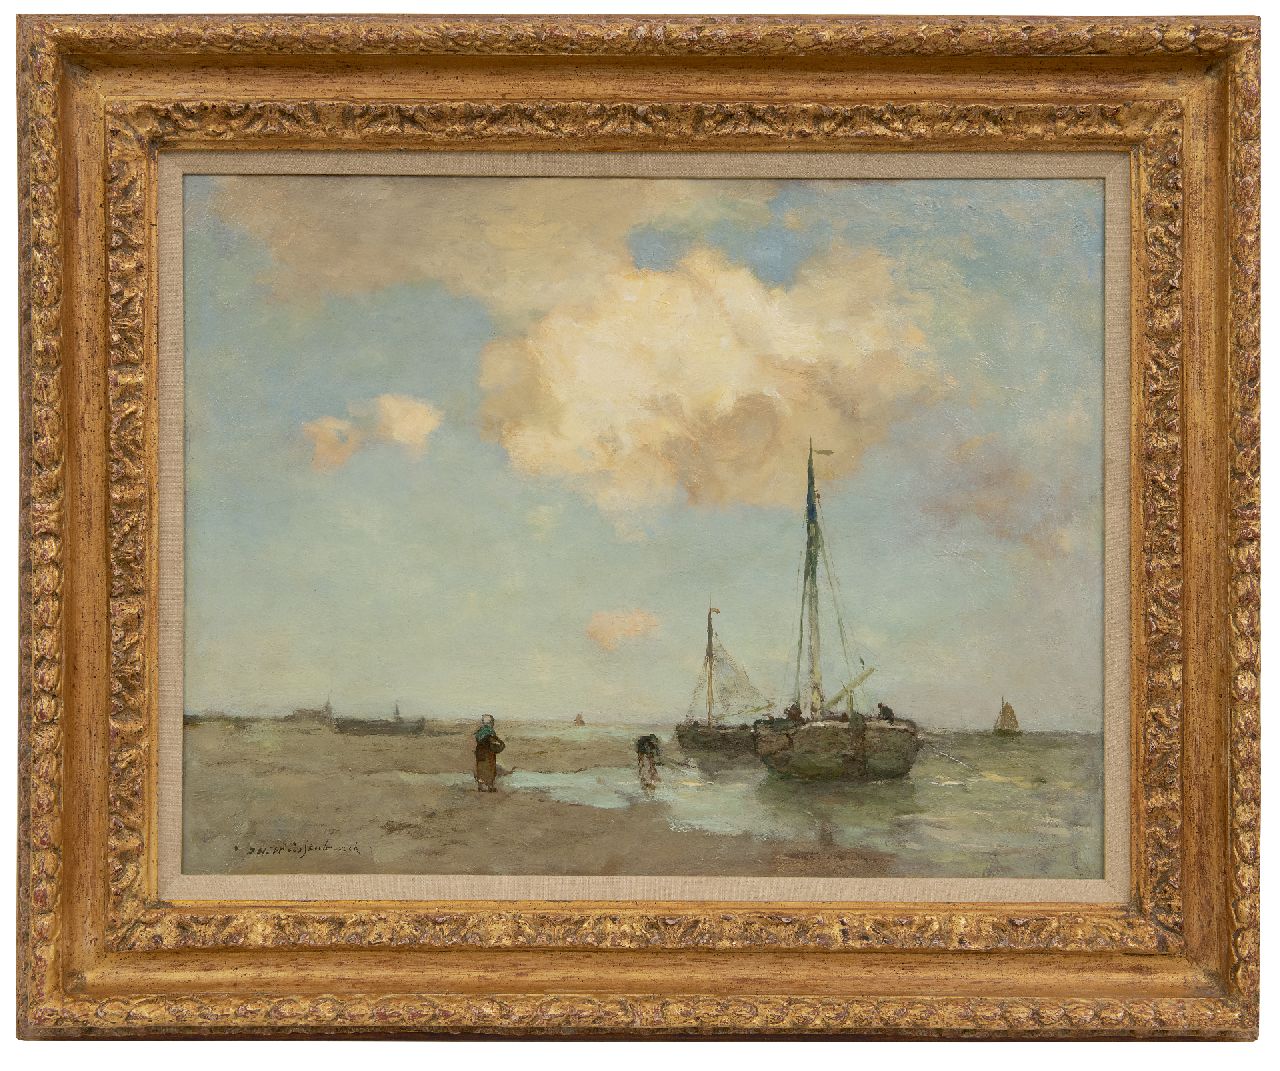 Weissenbruch H.J.  | Hendrik Johannes 'J.H.' Weissenbruch | Paintings offered for sale | Fishing boats on the tide line, oil on canvas 38.9 x 50.9 cm, signed l.l.